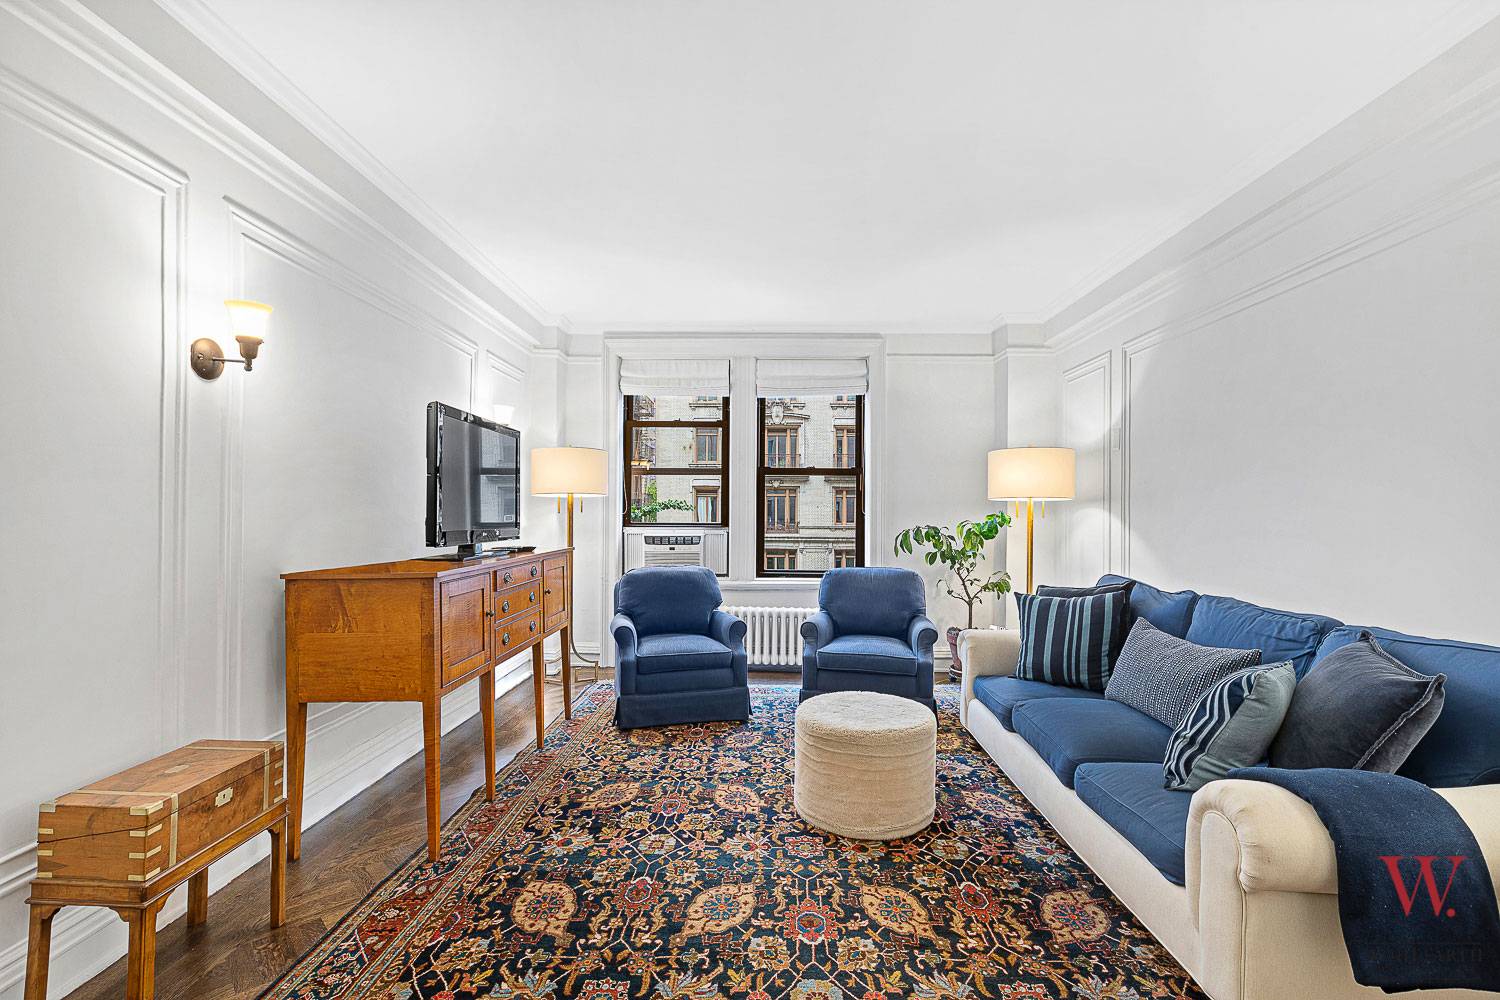 Take a look at this reimagined classic five room apartment in a great Upper West Side location.